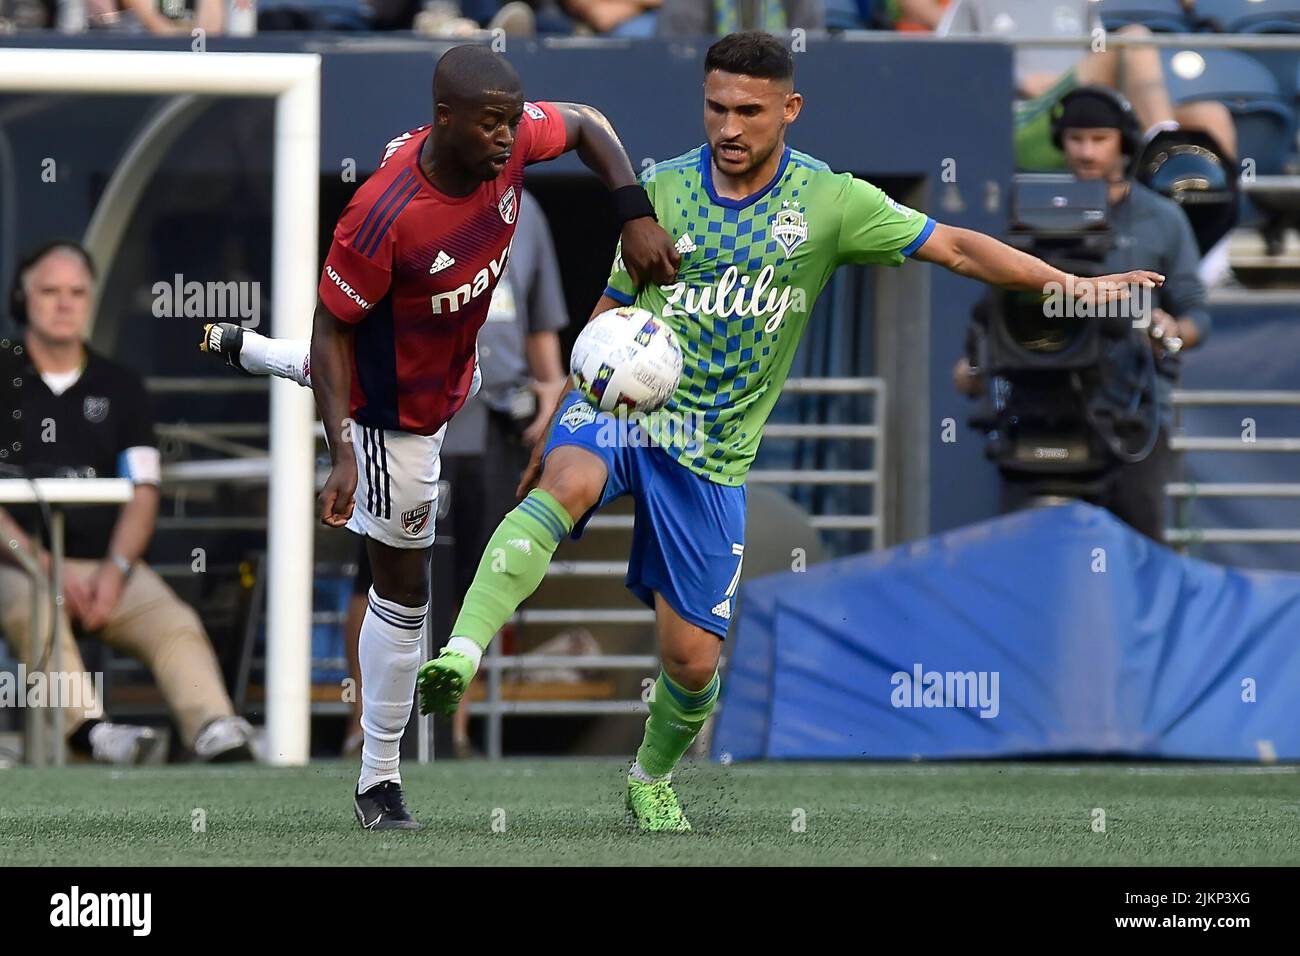 Seattle, Washington, USA. August 02, 2022: Seattle Sounders midfielder Cristian Roldan (7) and FC Dallas defender NanÃº (31) during the first half of the MLS soccer match between FC Dallas and Seattle Sounders FC at Lumen Field in Seattle, WA. Seattle defeated Dallas 1-0. Seattle defeated Dallas 1-0. Steve Faber/CSM Credit: Cal Sport Media/Alamy Live News Stock Photo